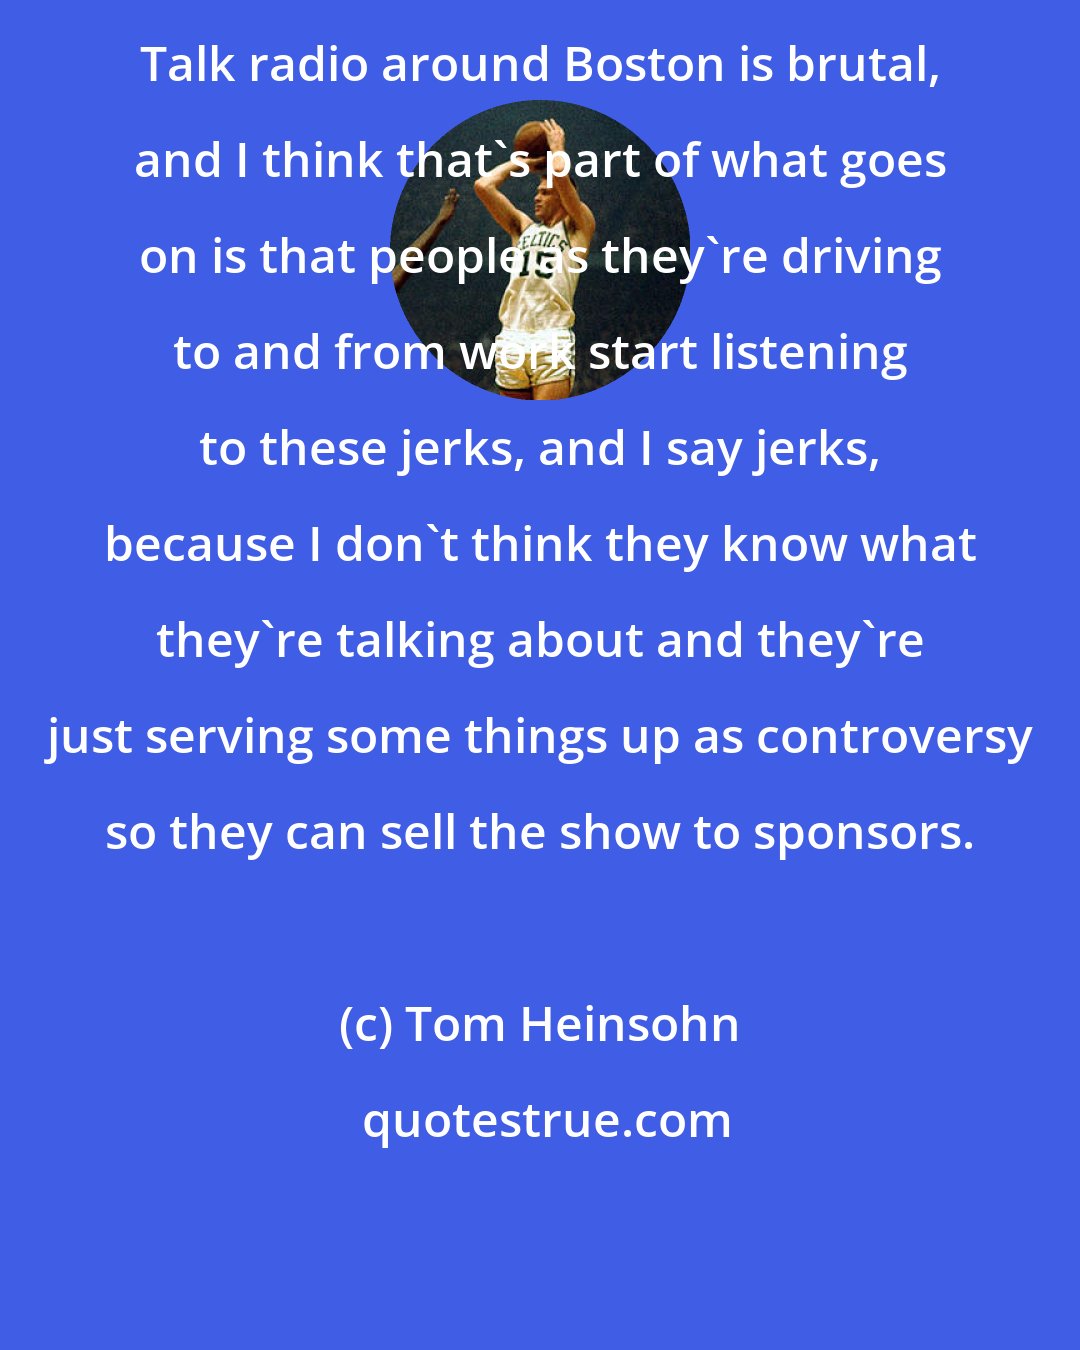 Tom Heinsohn: Talk radio around Boston is brutal, and I think that's part of what goes on is that people as they're driving to and from work start listening to these jerks, and I say jerks, because I don't think they know what they're talking about and they're just serving some things up as controversy so they can sell the show to sponsors.